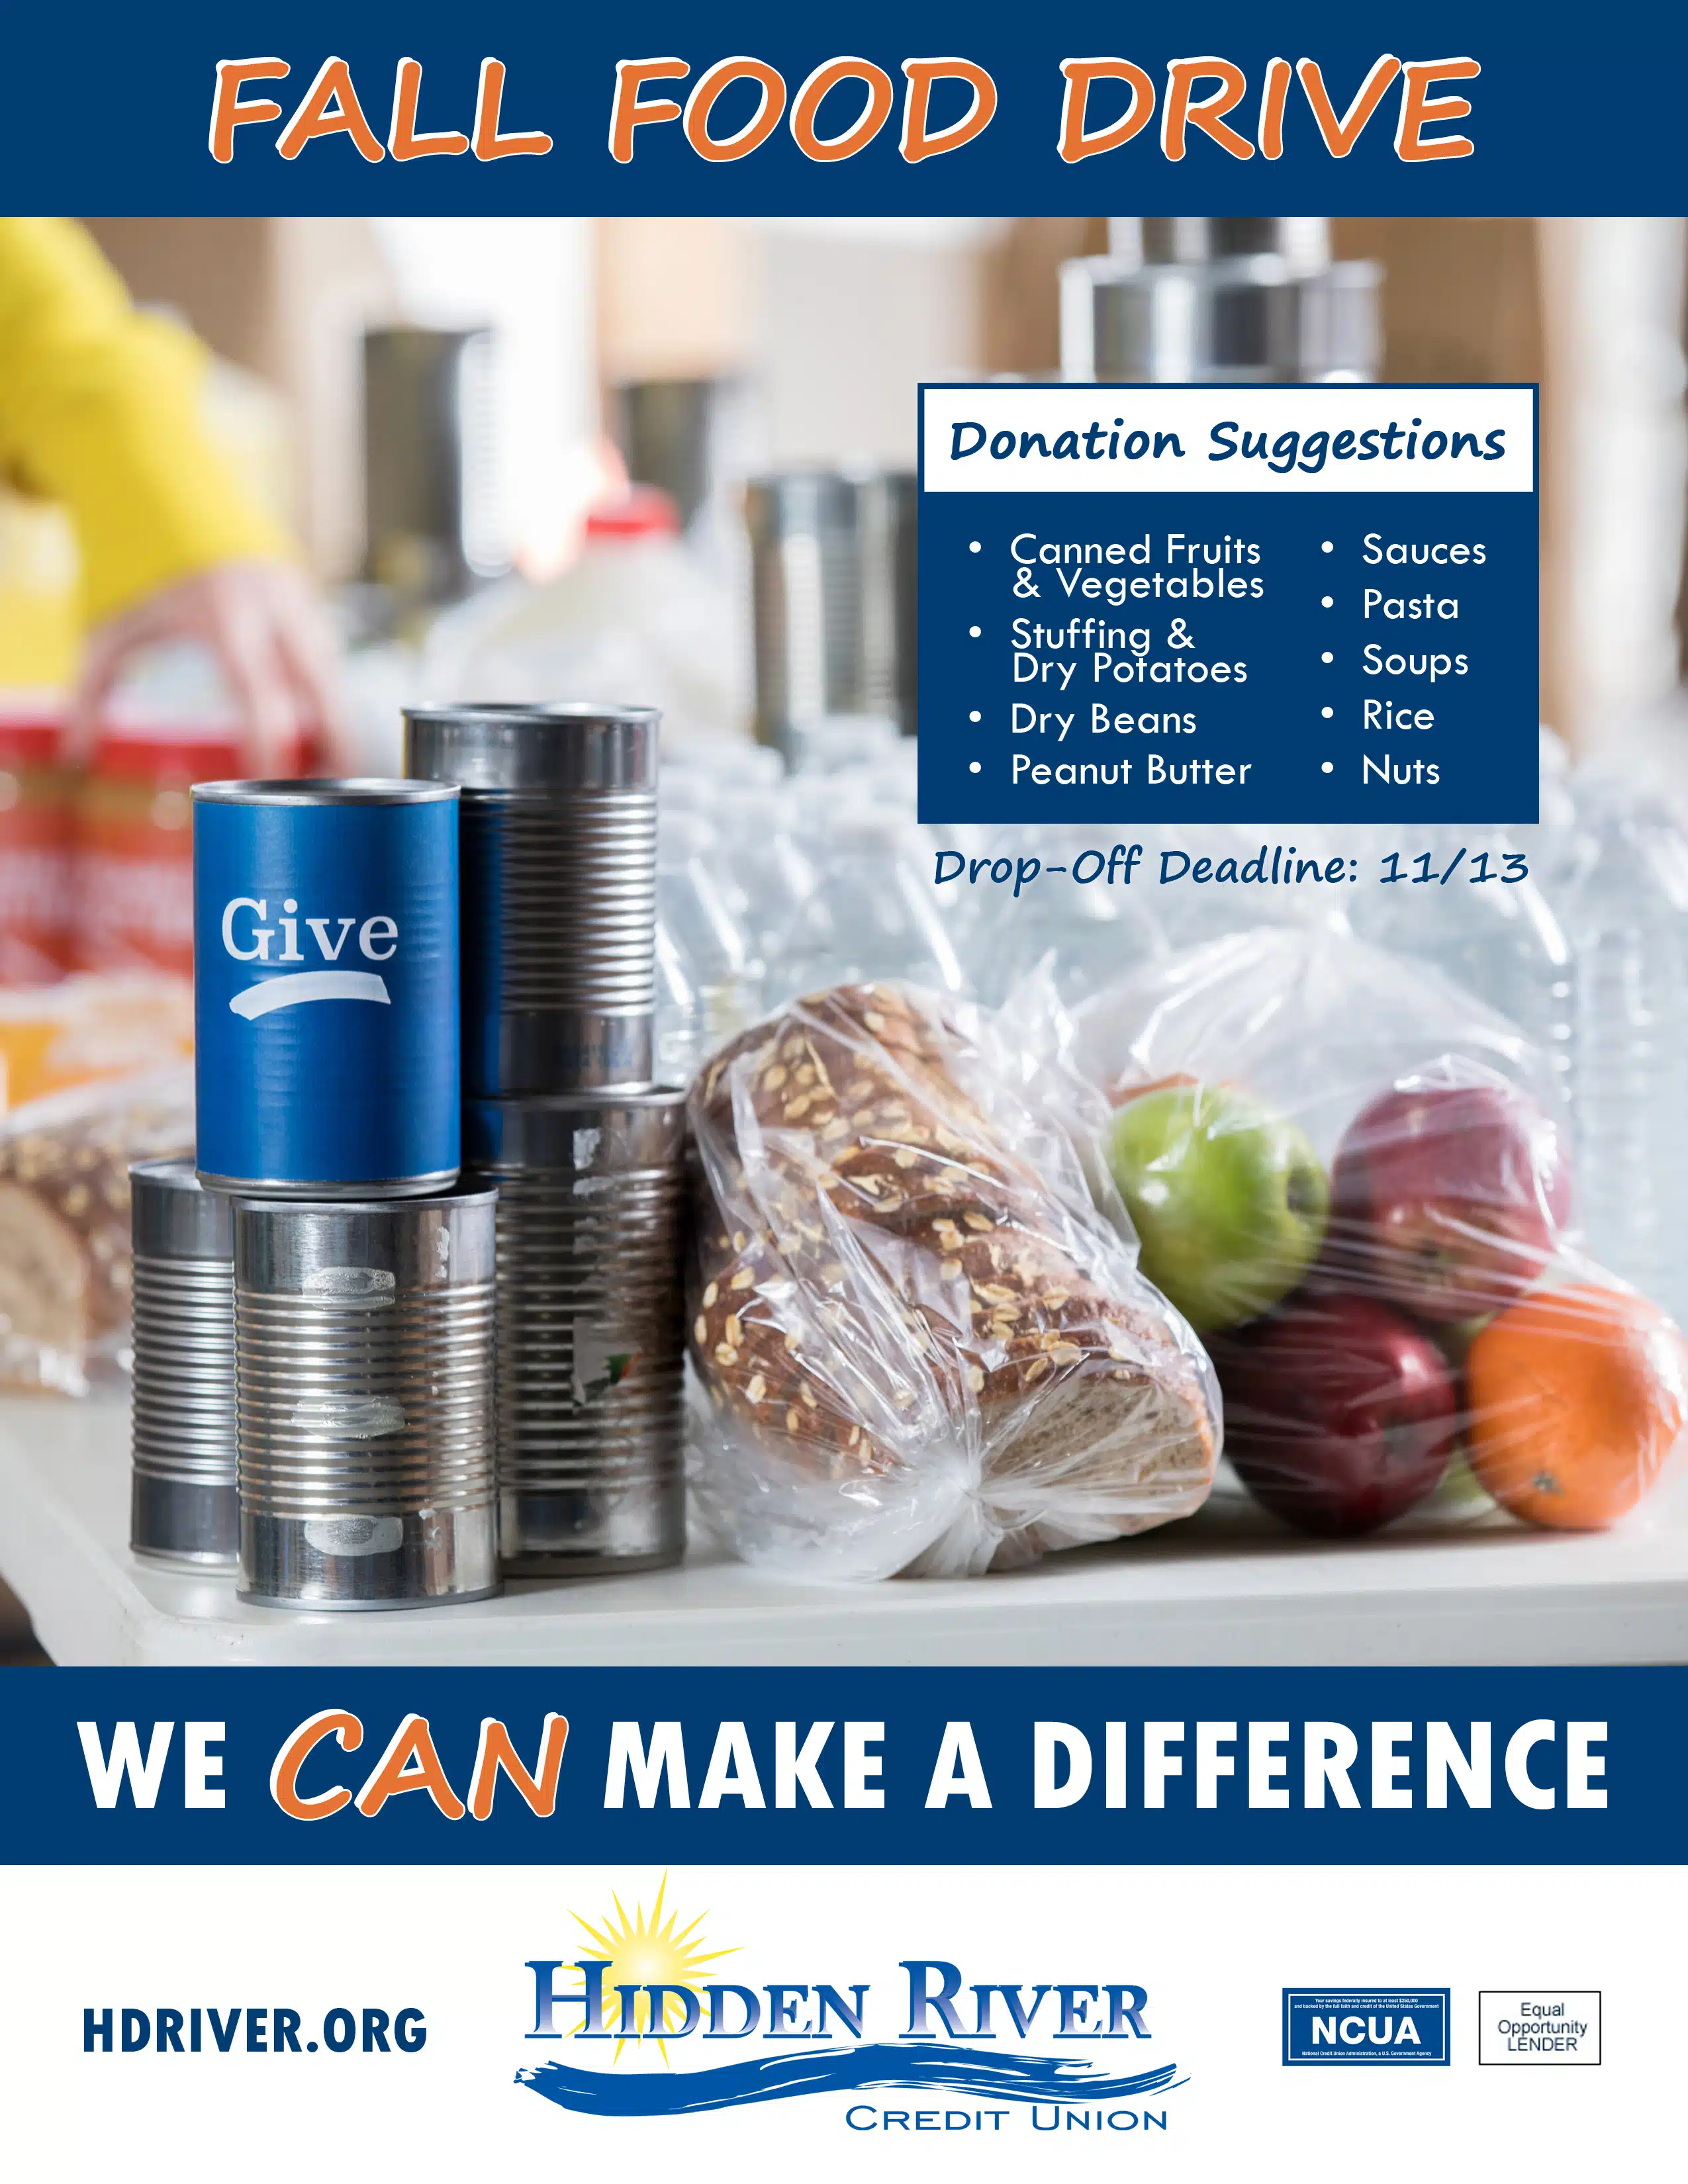 Canned foods, bread, and fruit on a table with text describing donation suggestions for Fall Food Drive. We CAN Make a Difference.